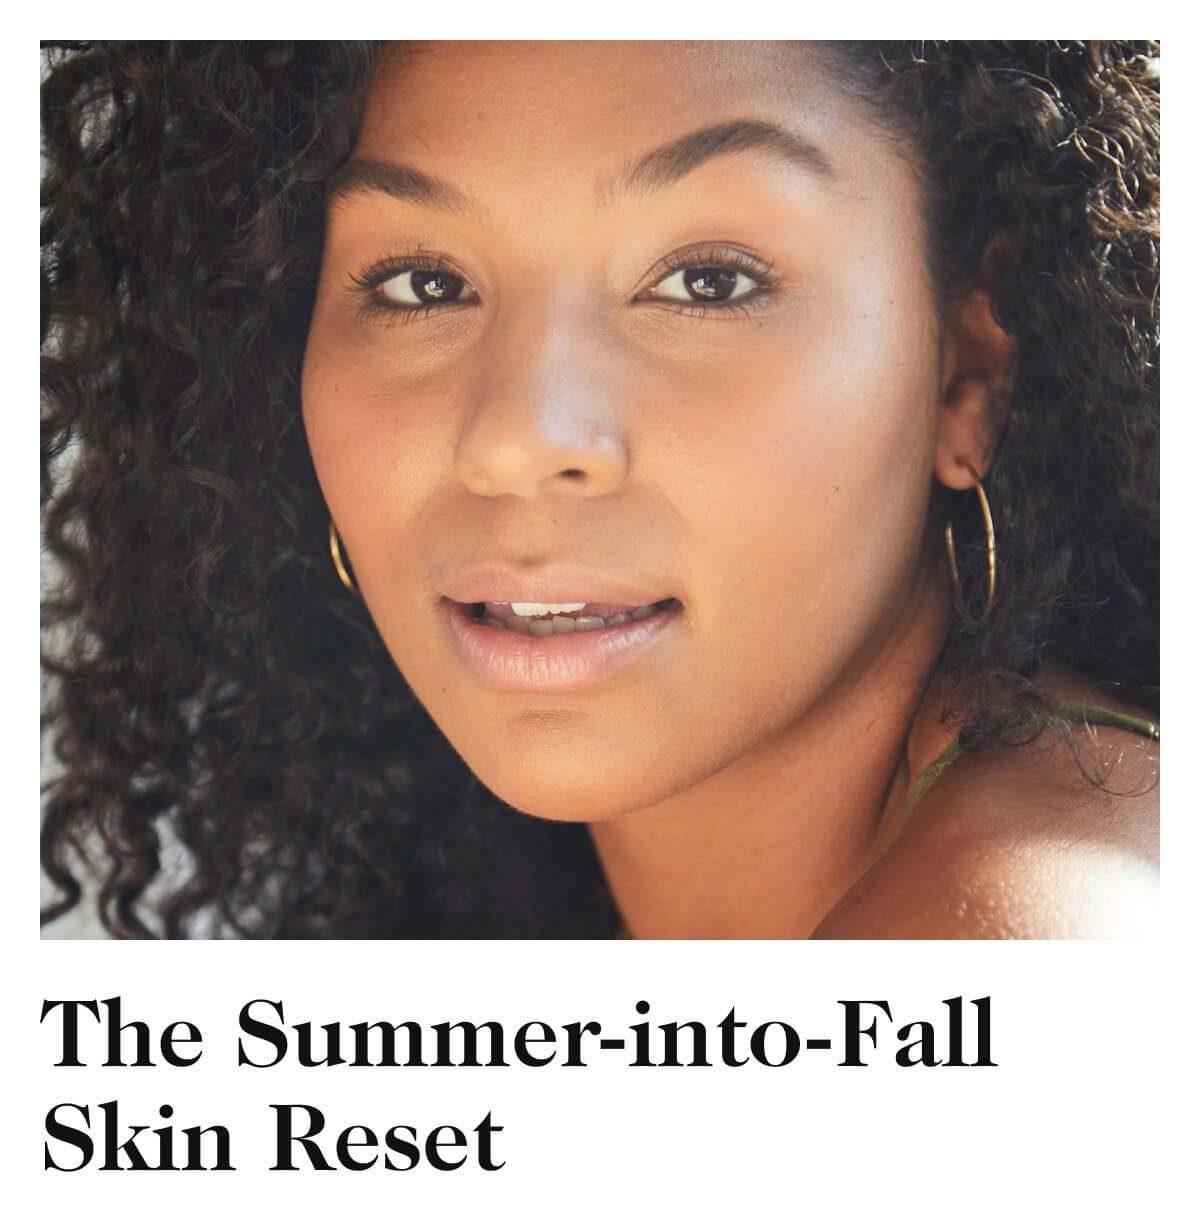 The Summer-into-Fall Skin Reset